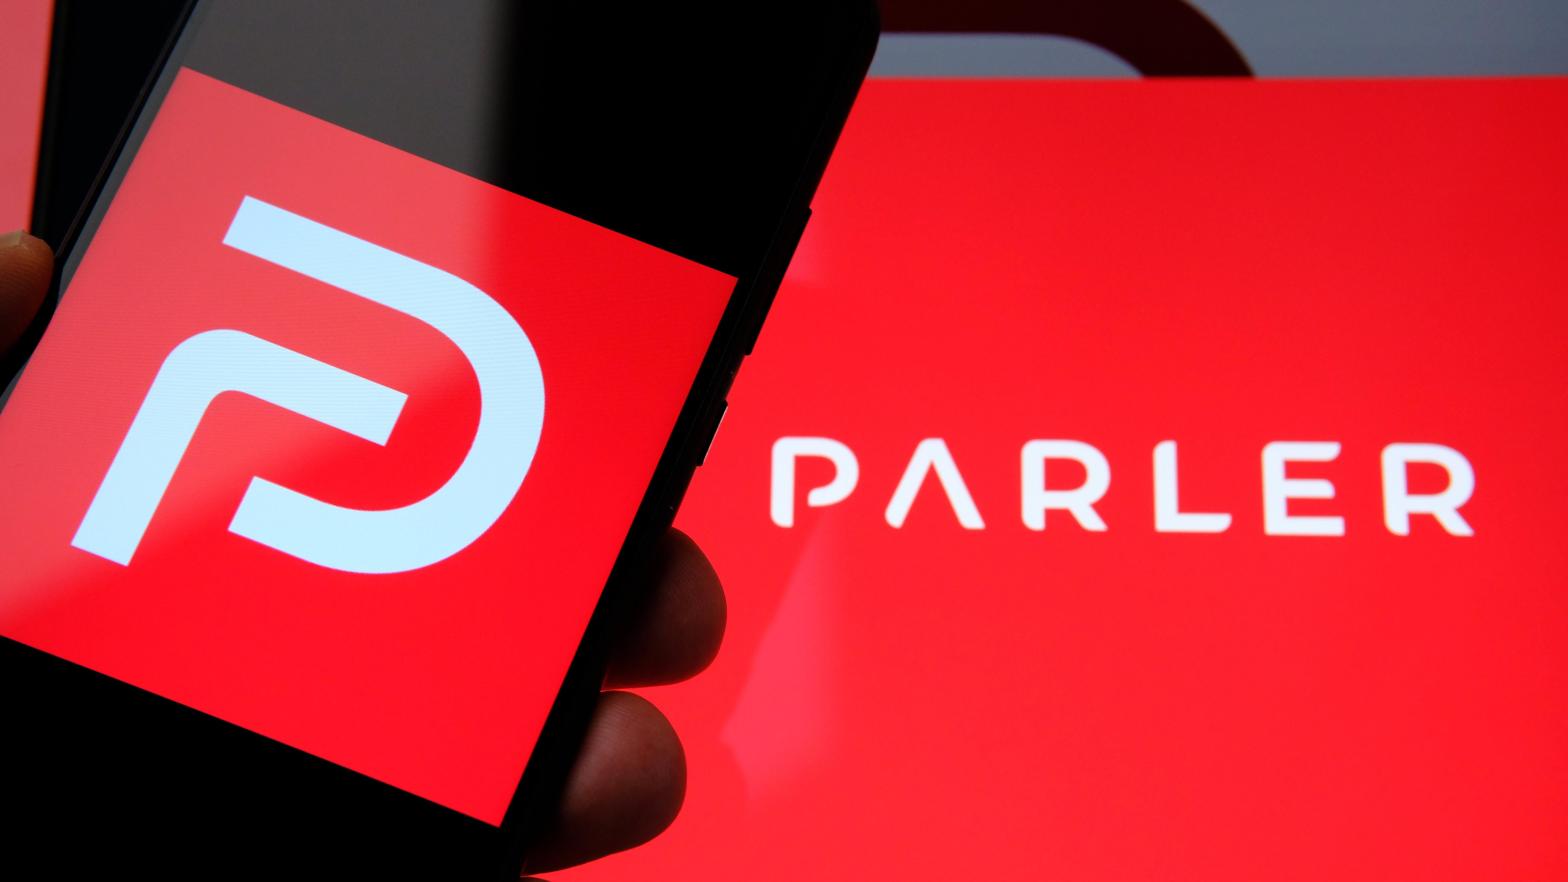 News about a sale or about its questionable future seem to be the only things that get Parler in the mainstream nowadays. (Photo: Ascannio, Shutterstock)